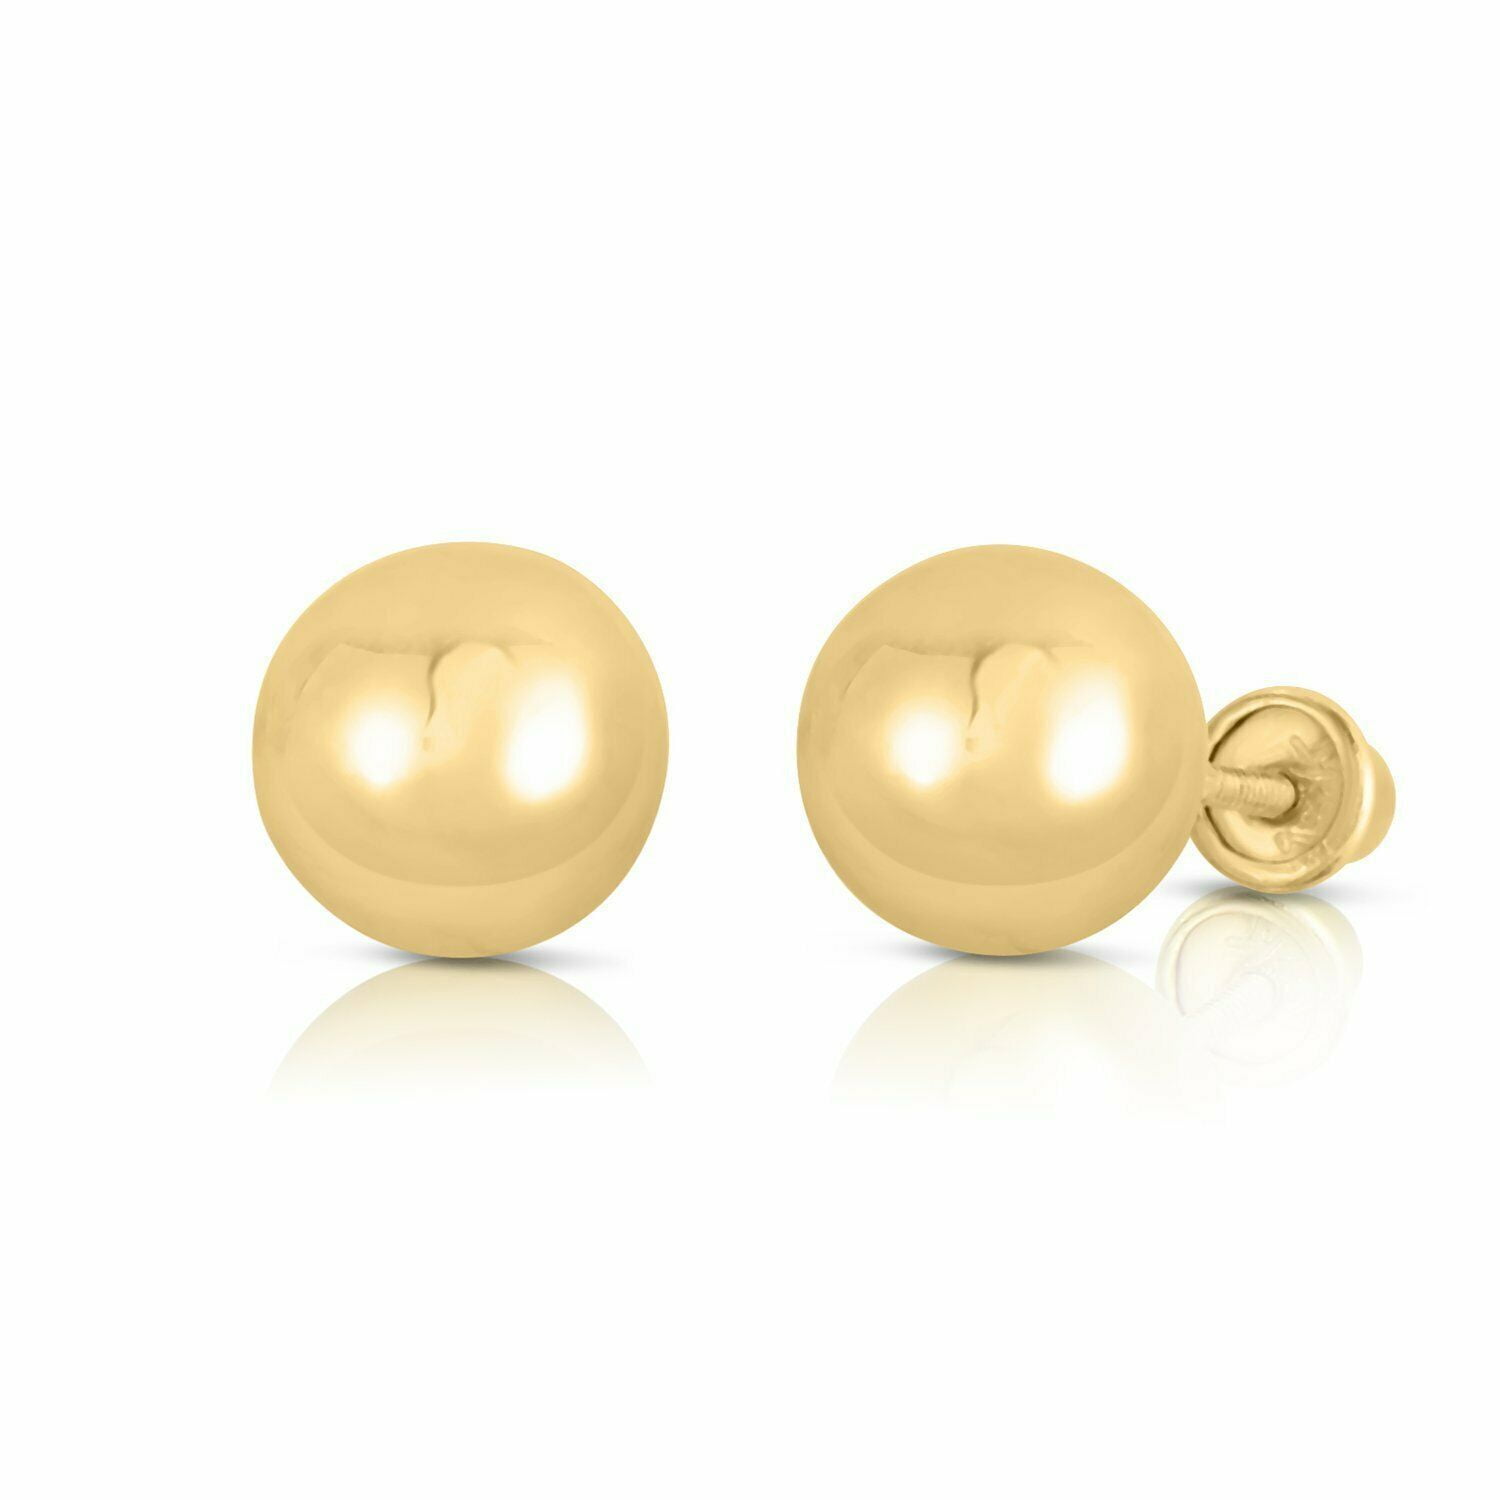  14k White Gold Ball Stud Earrings with Secure Screw-backs  (3mm): Clothing, Shoes & Jewelry